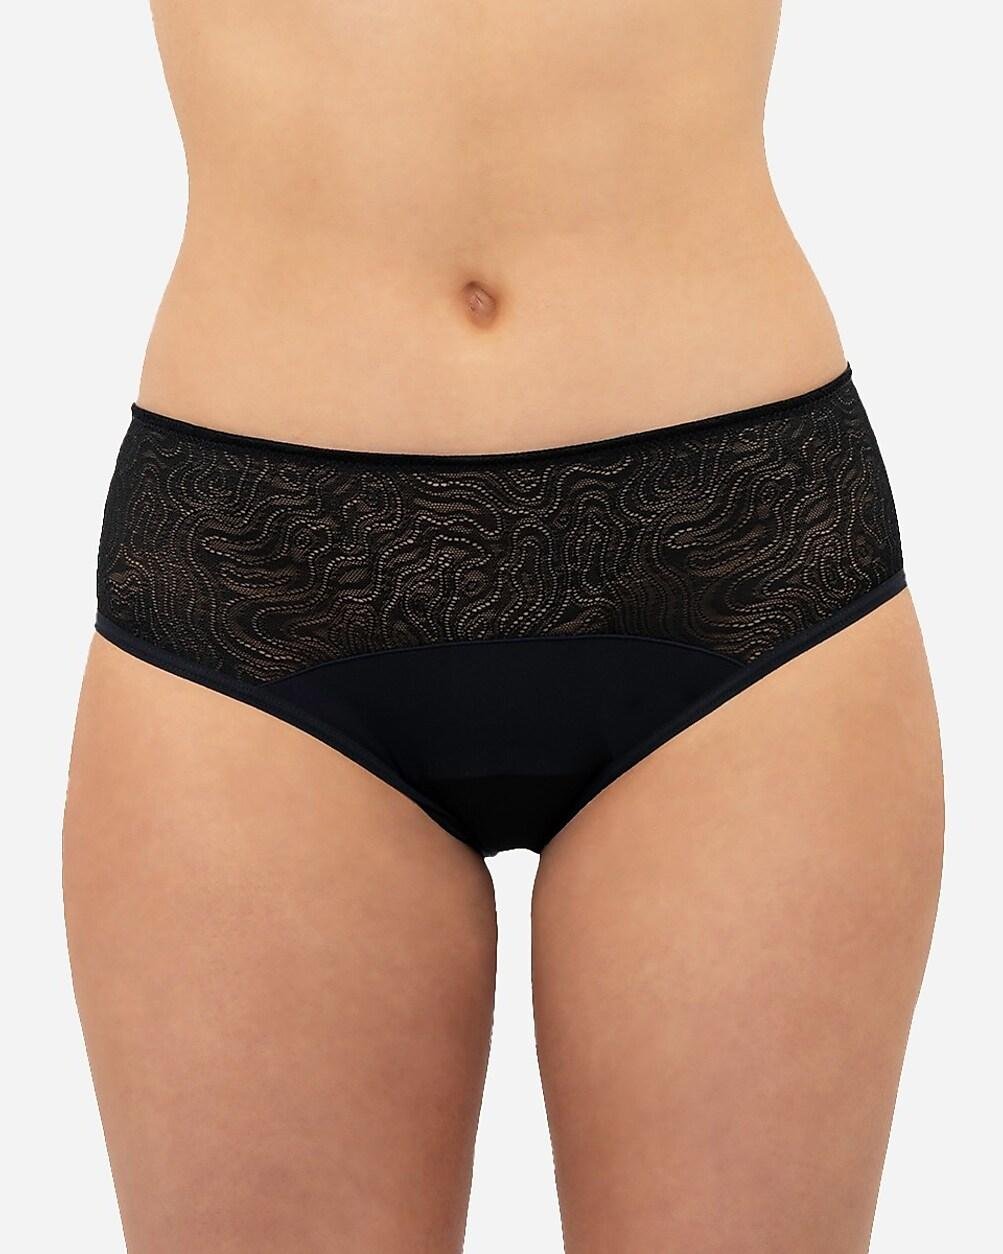 Saalt period and leakproof lace hipster by J.CREW